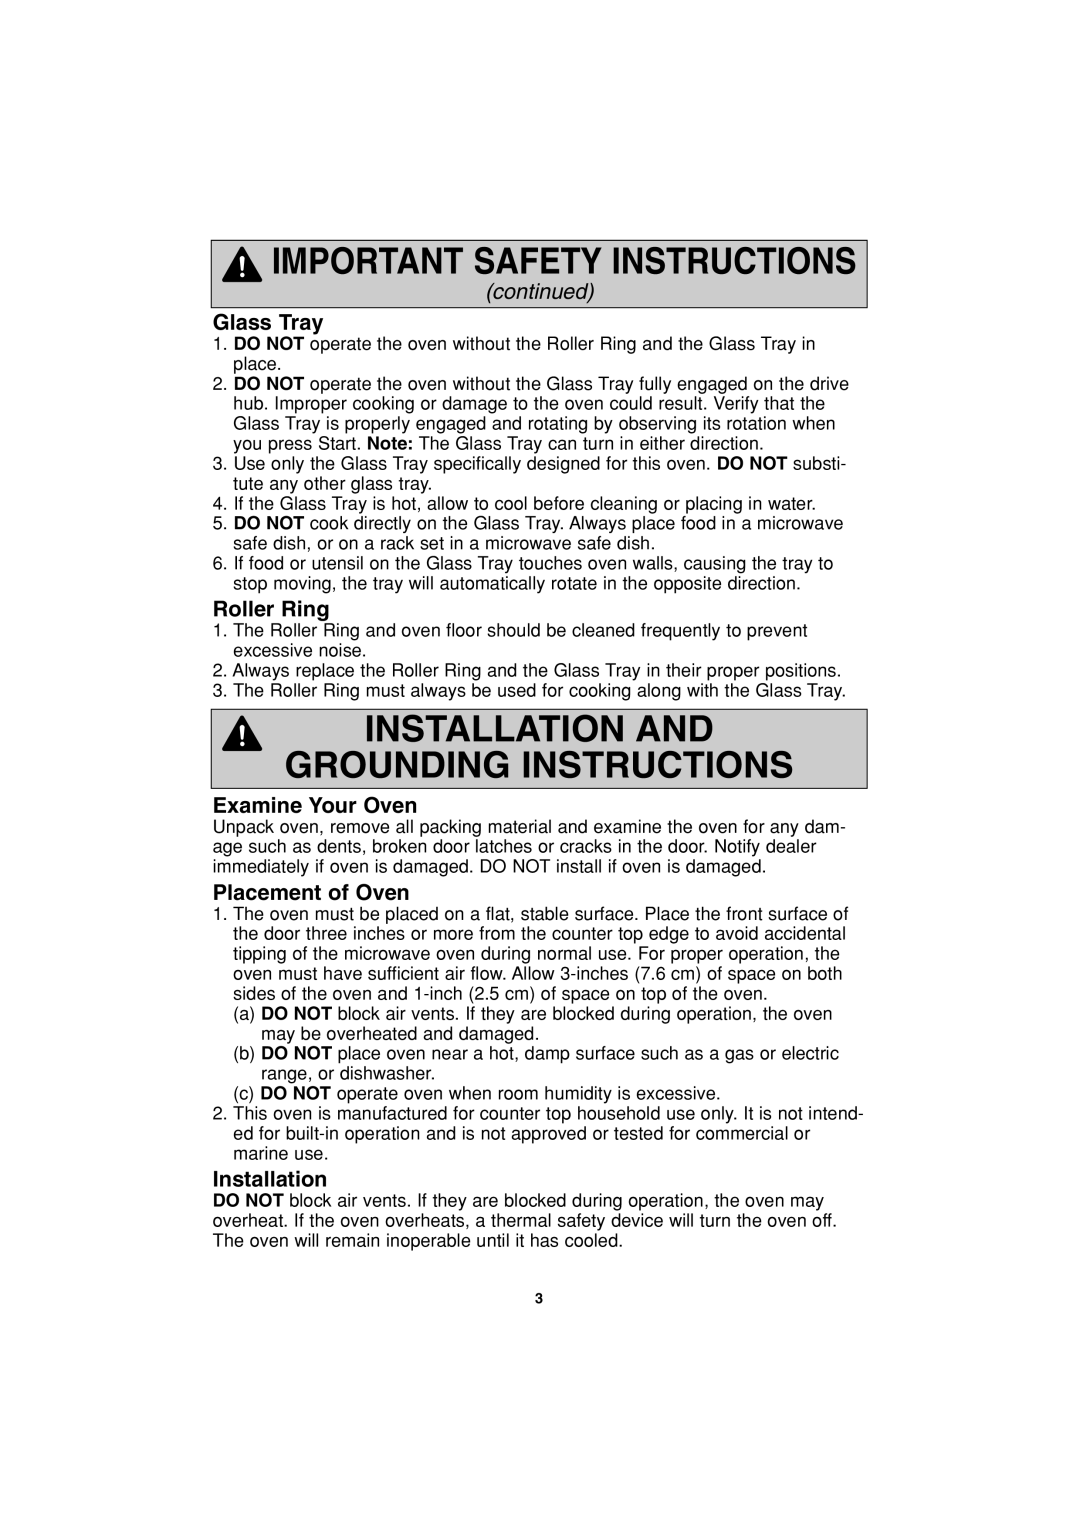 Panasonic NN-S953 Installation And Grounding Instructions, Glass Tray, Roller Ring, Examine Your Oven, Placement of Oven 